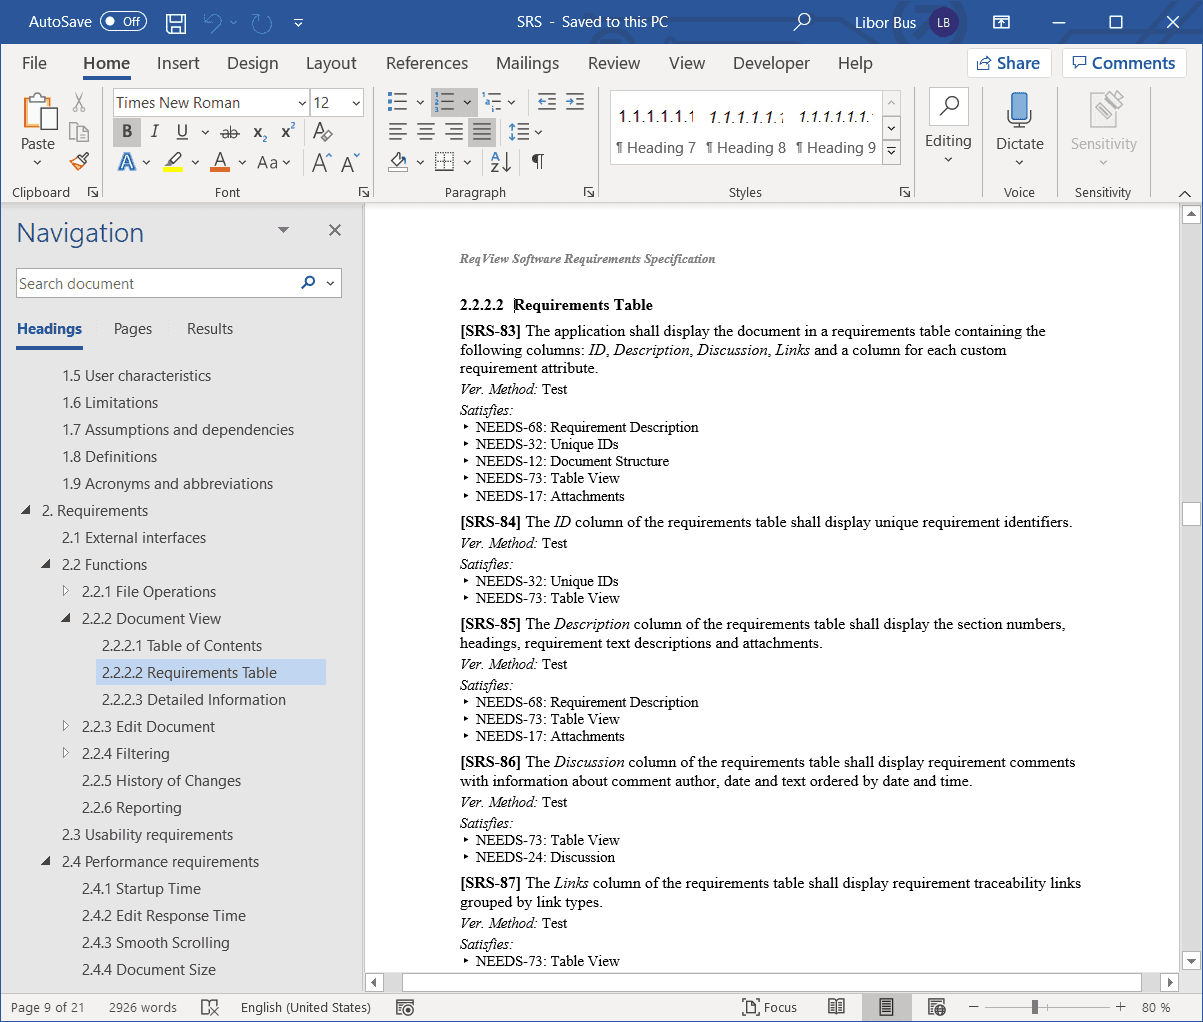 MS Word document with requirements and traceability links exported from ReqView